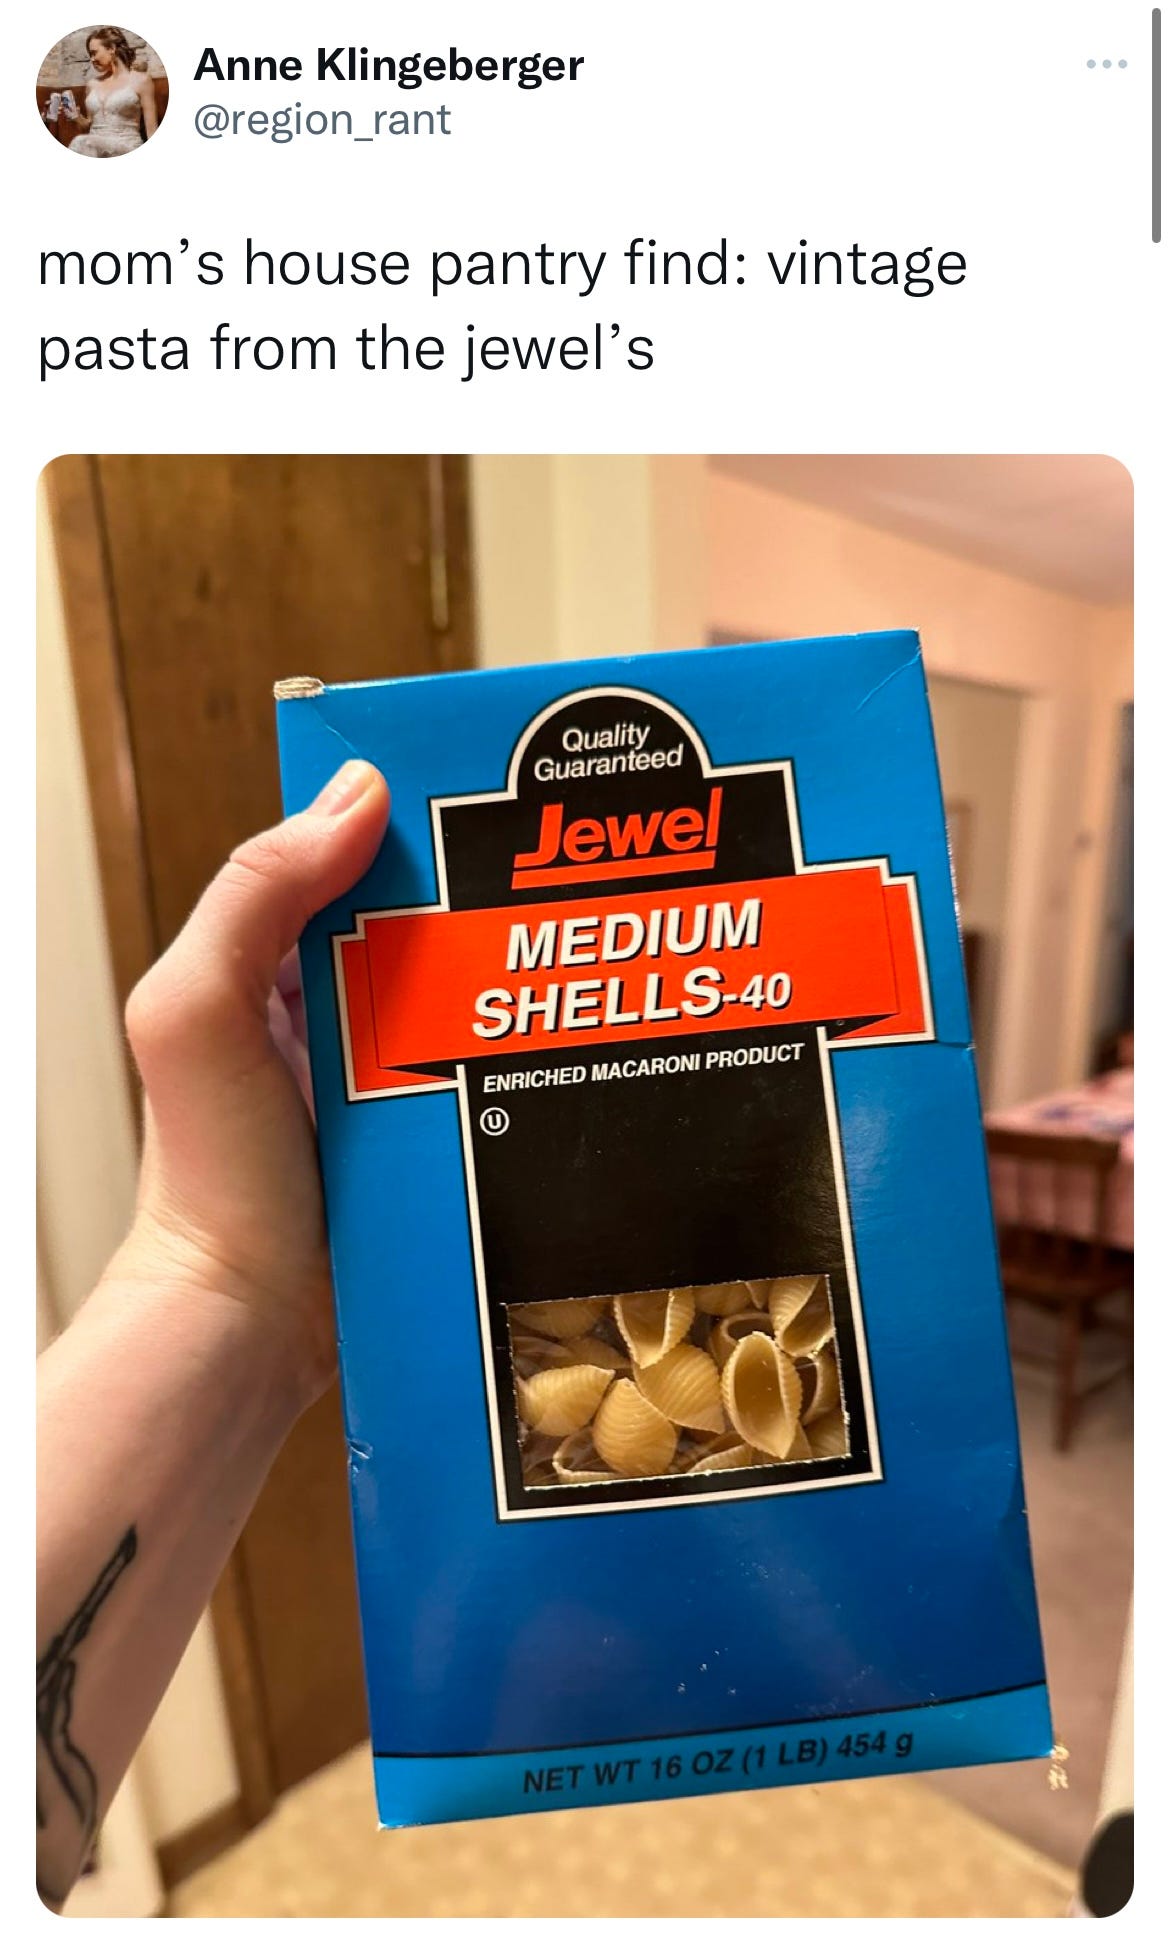 tweet from anne klingeberger @region_rant that says mom's house pantry find: vintage pasta from the jewel's and features an image of a blue, very old jewel osco box with macaroni shells still in it. they look normal, no mold